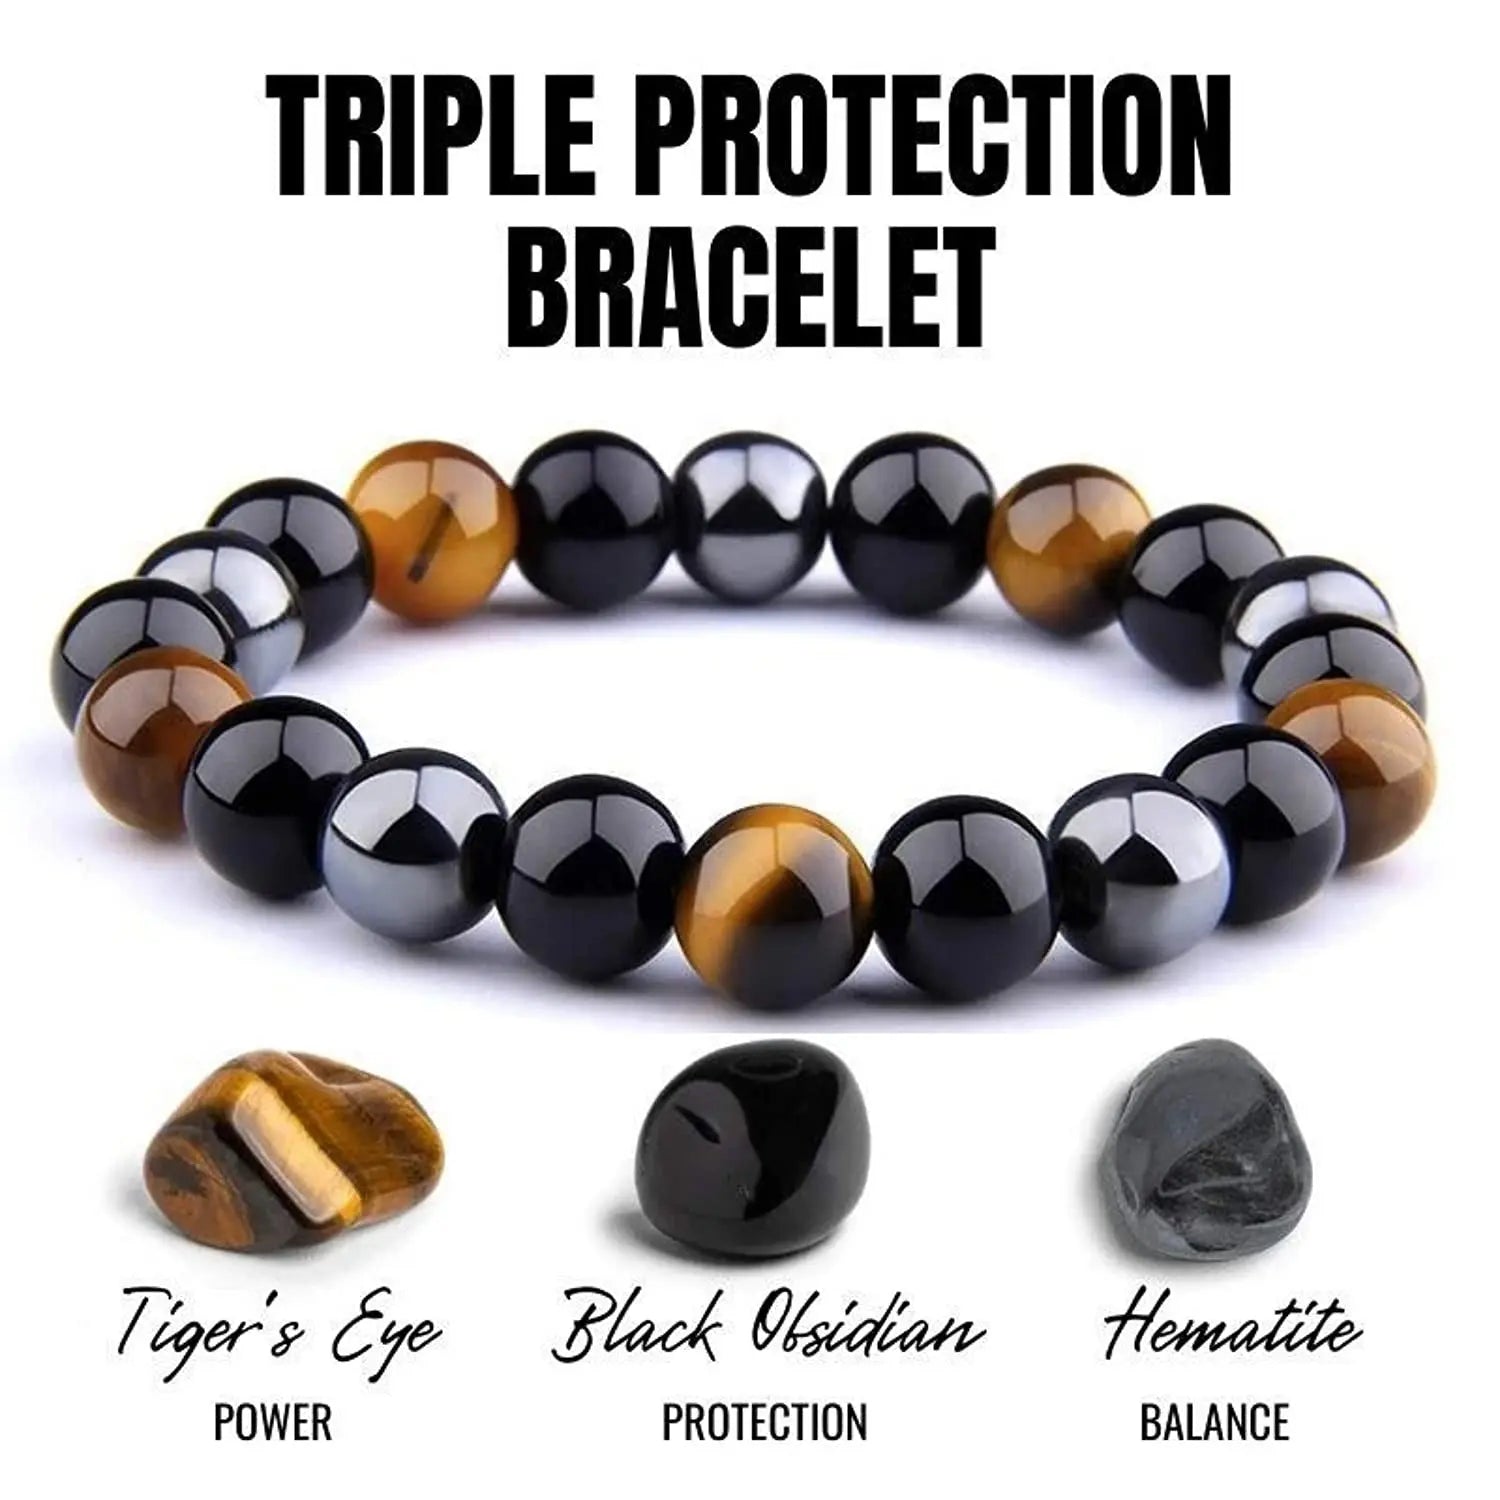 Amazoncom Triple Protection Bracelet  For Protection  Bring Luck And  Prosperity  Hematite  Black Obsidian  Tiger Eye  Stone Bracelet   Handmade Products